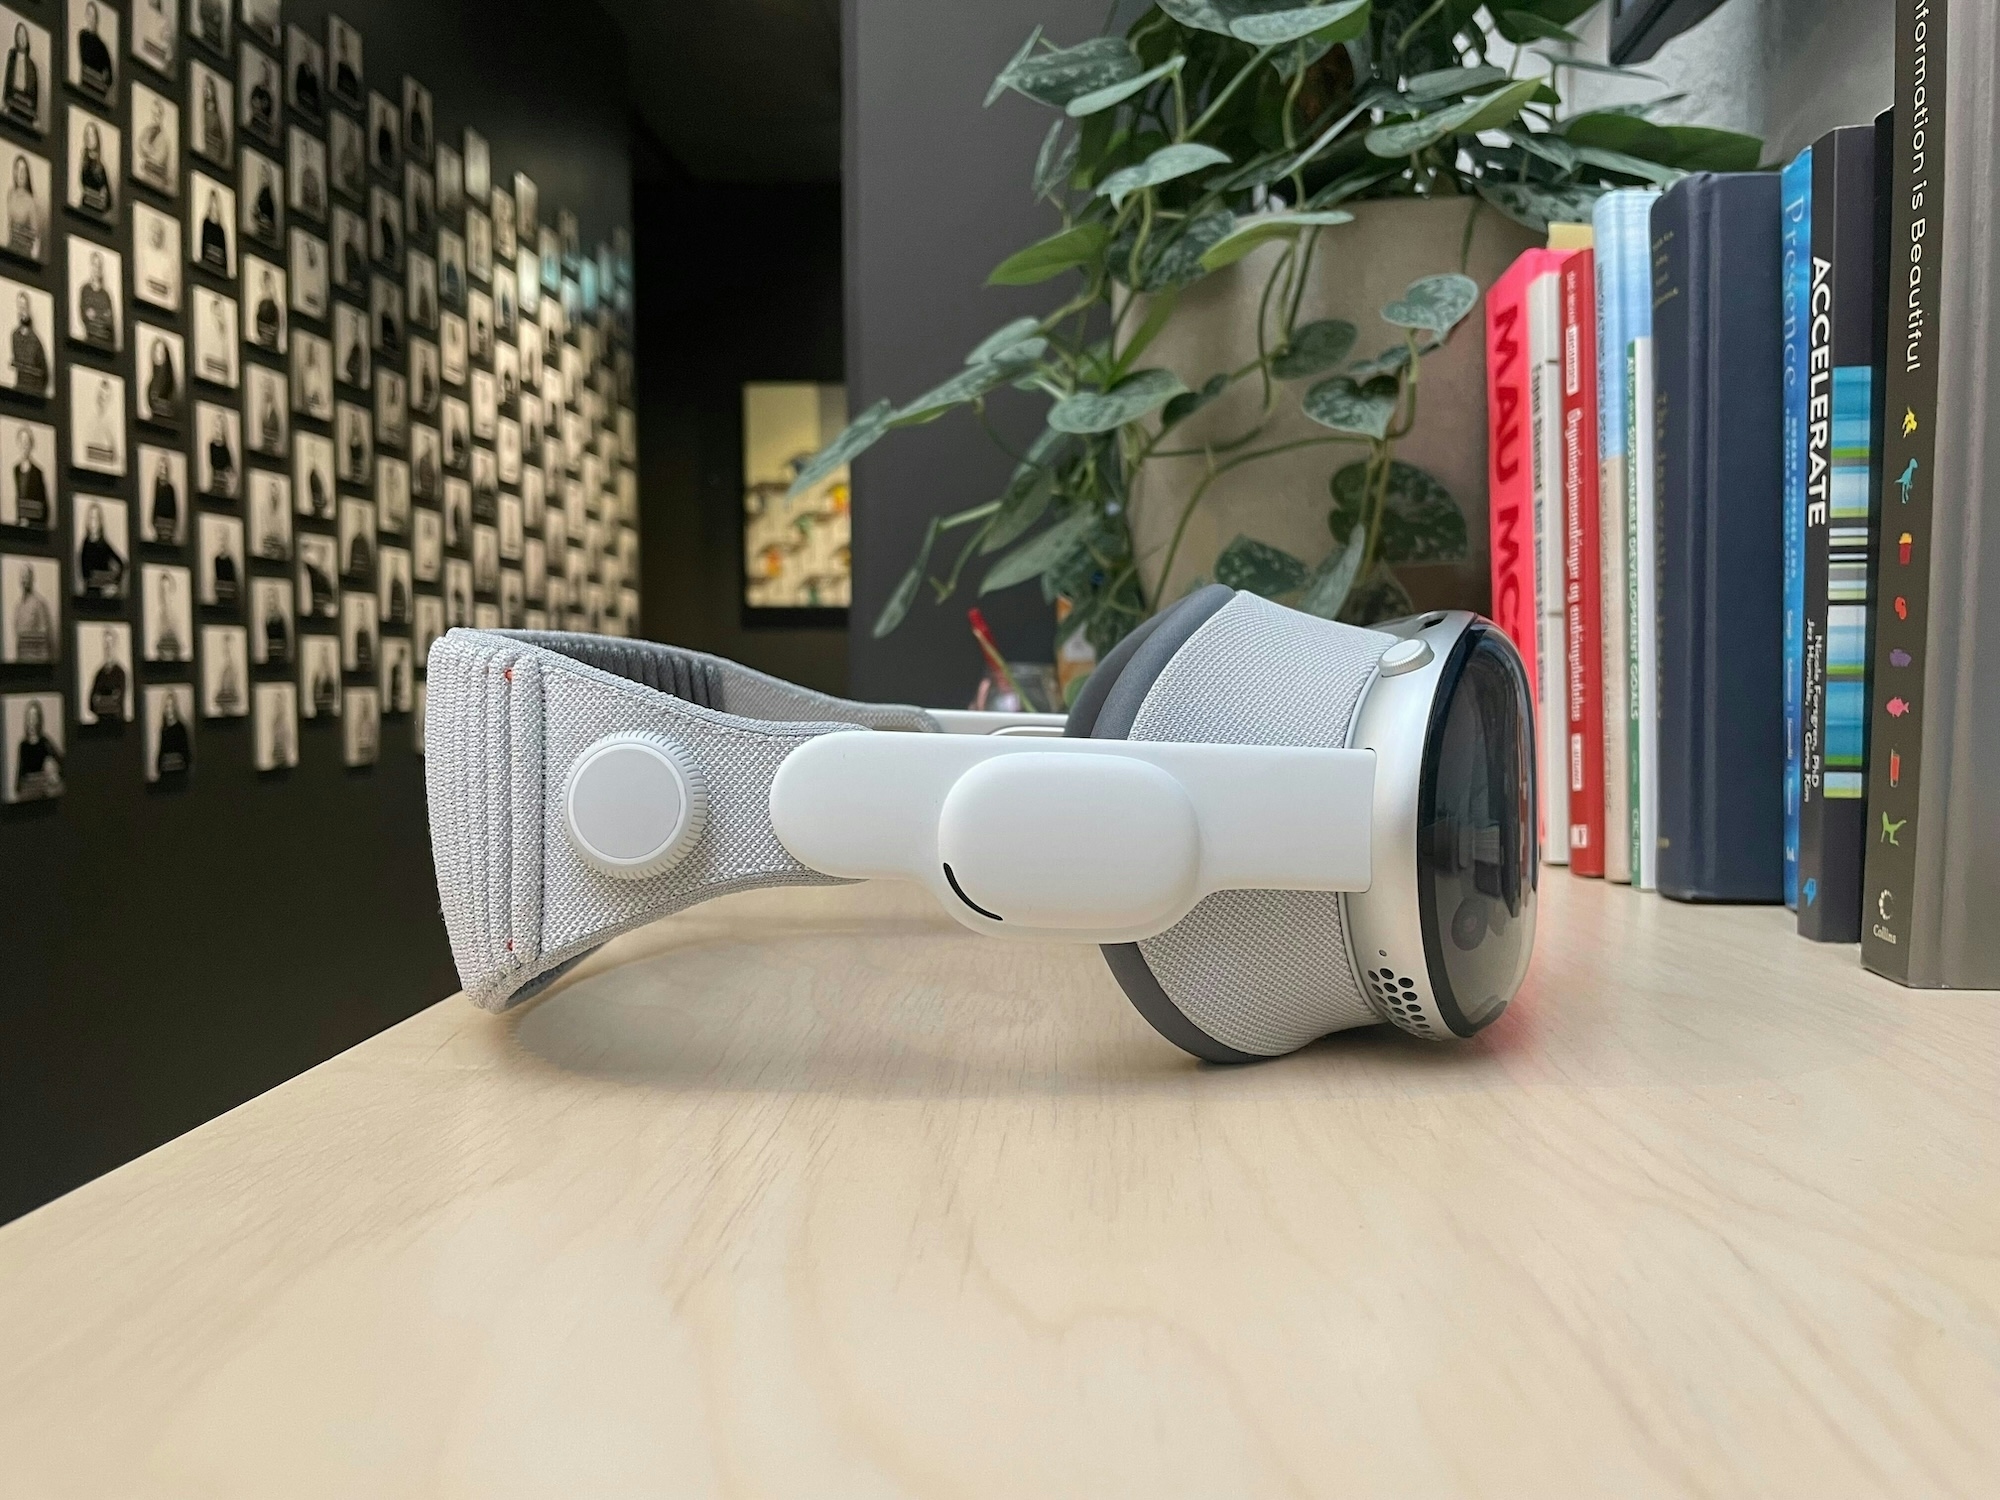 An Apple Vision Pro device placed on a wooden surface. A plant and dark wall with photos showing in the background. Photo and render.